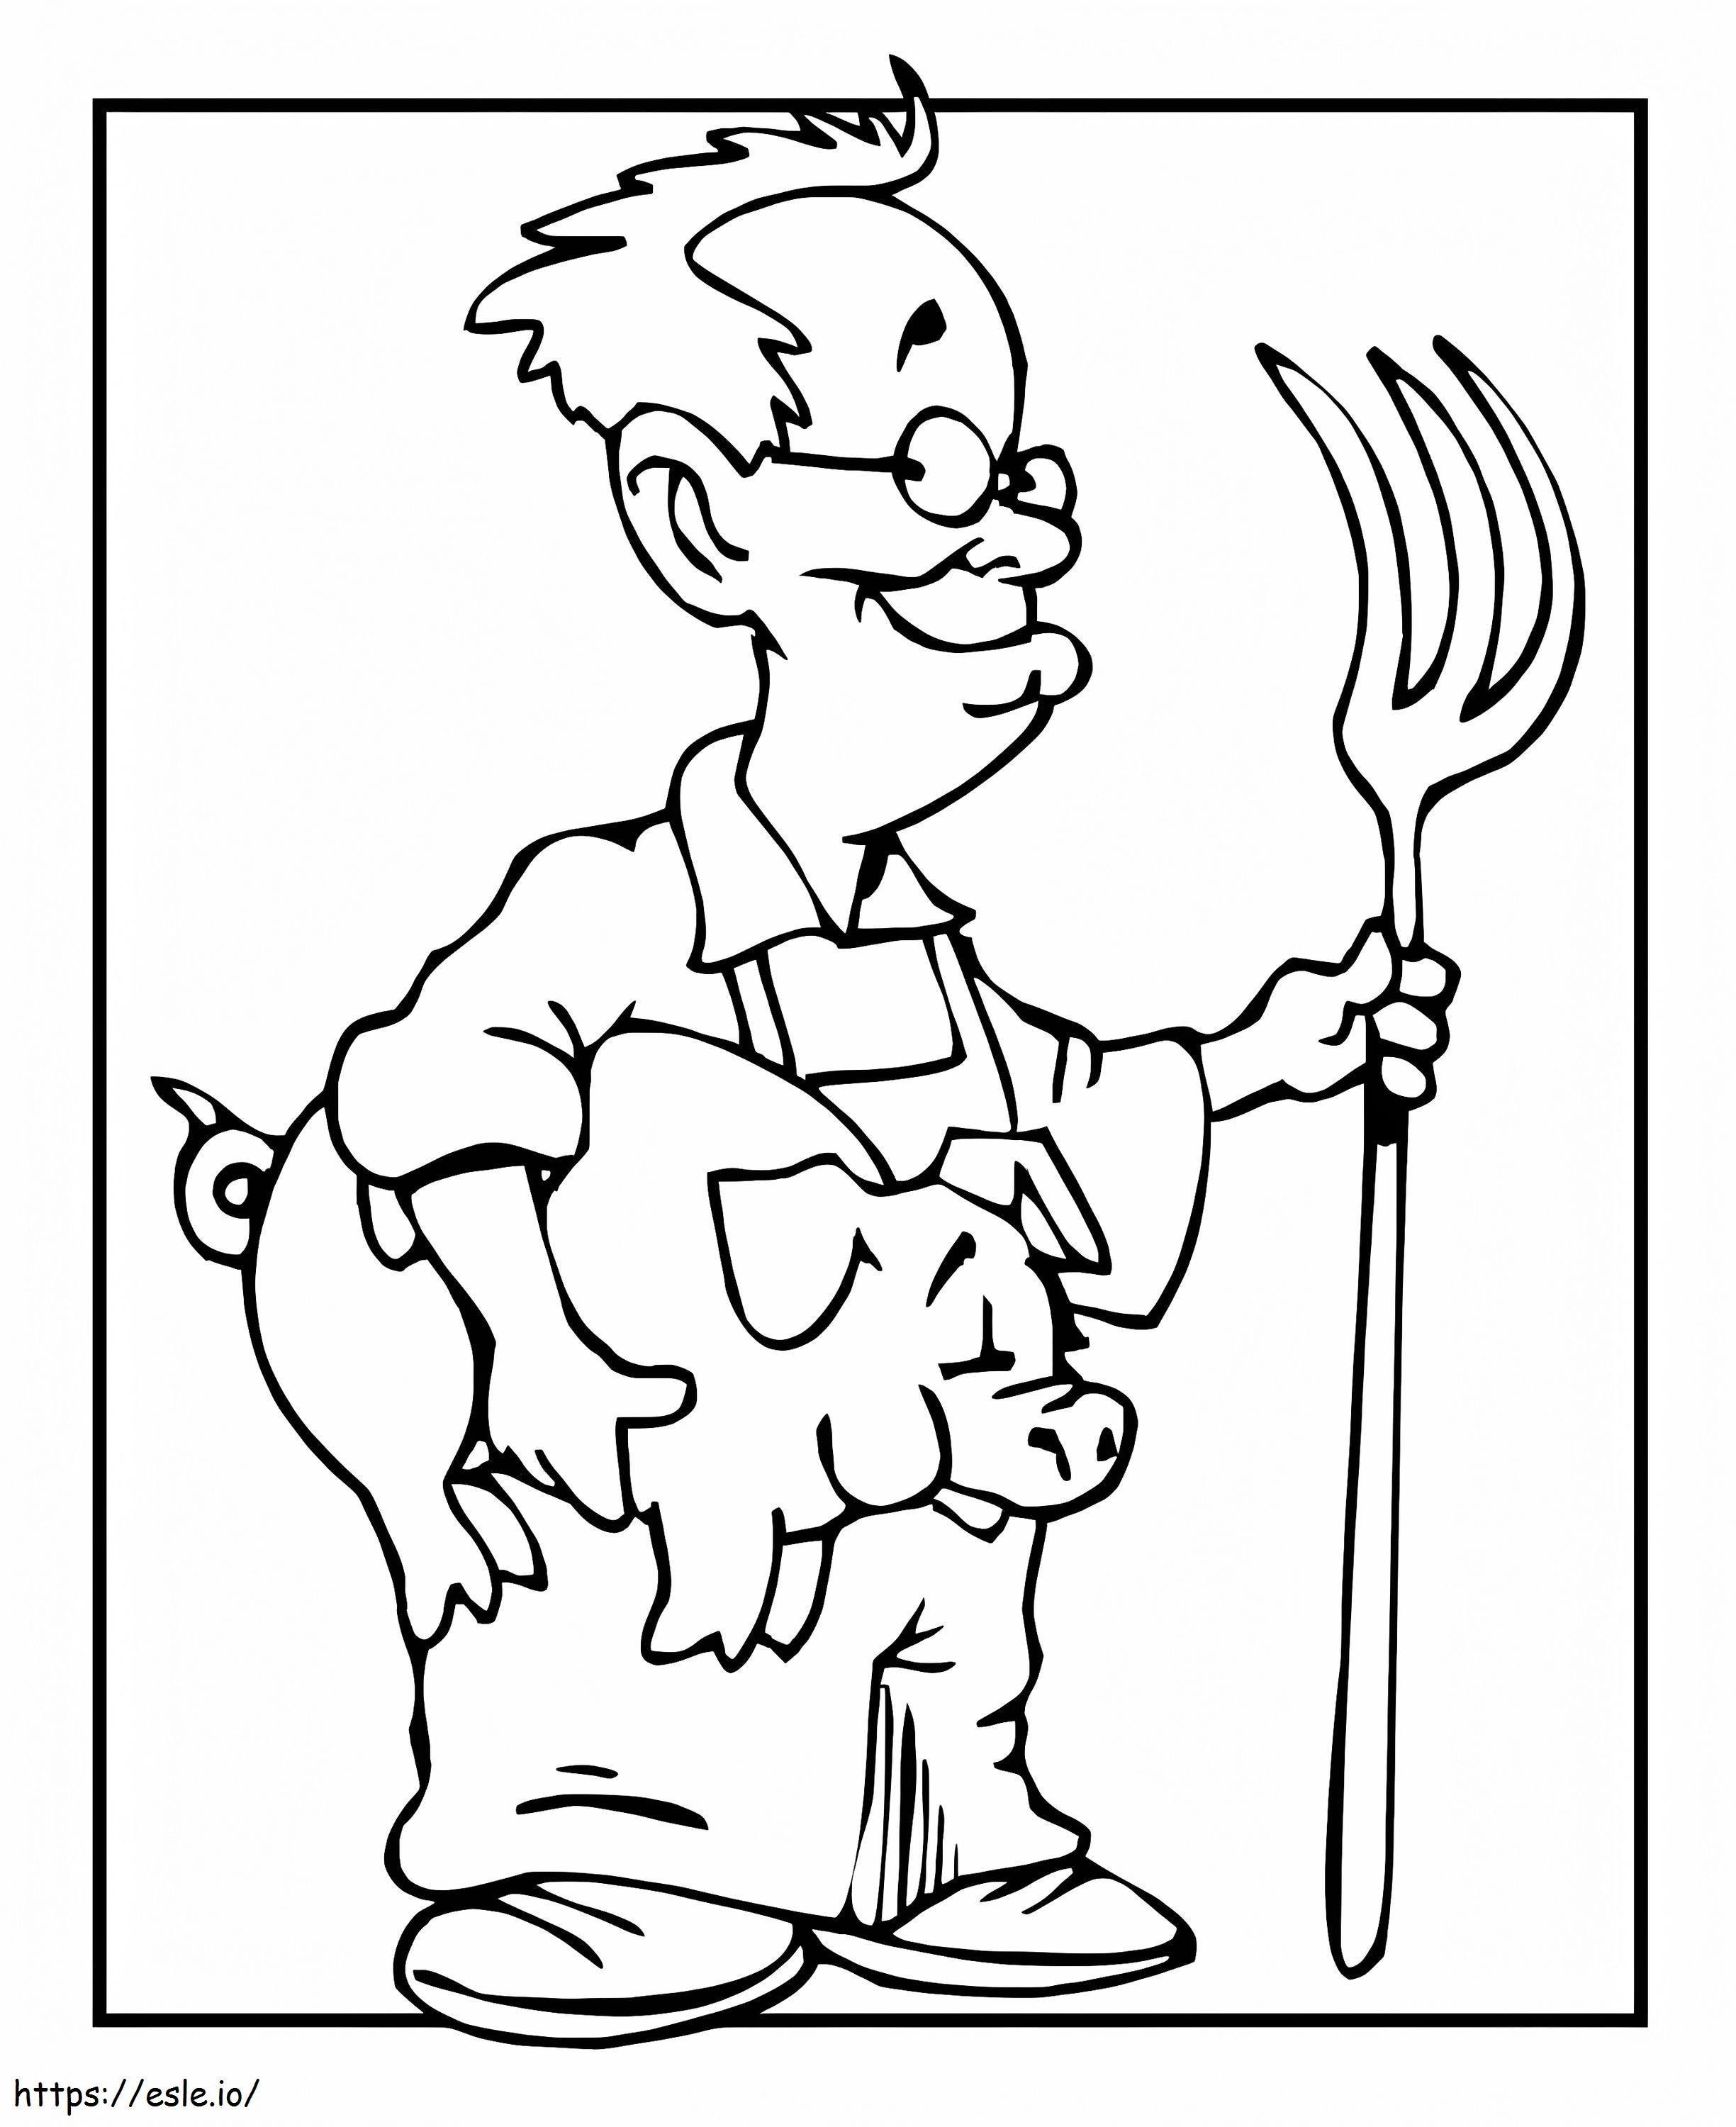 Farmer And A Pig coloring page